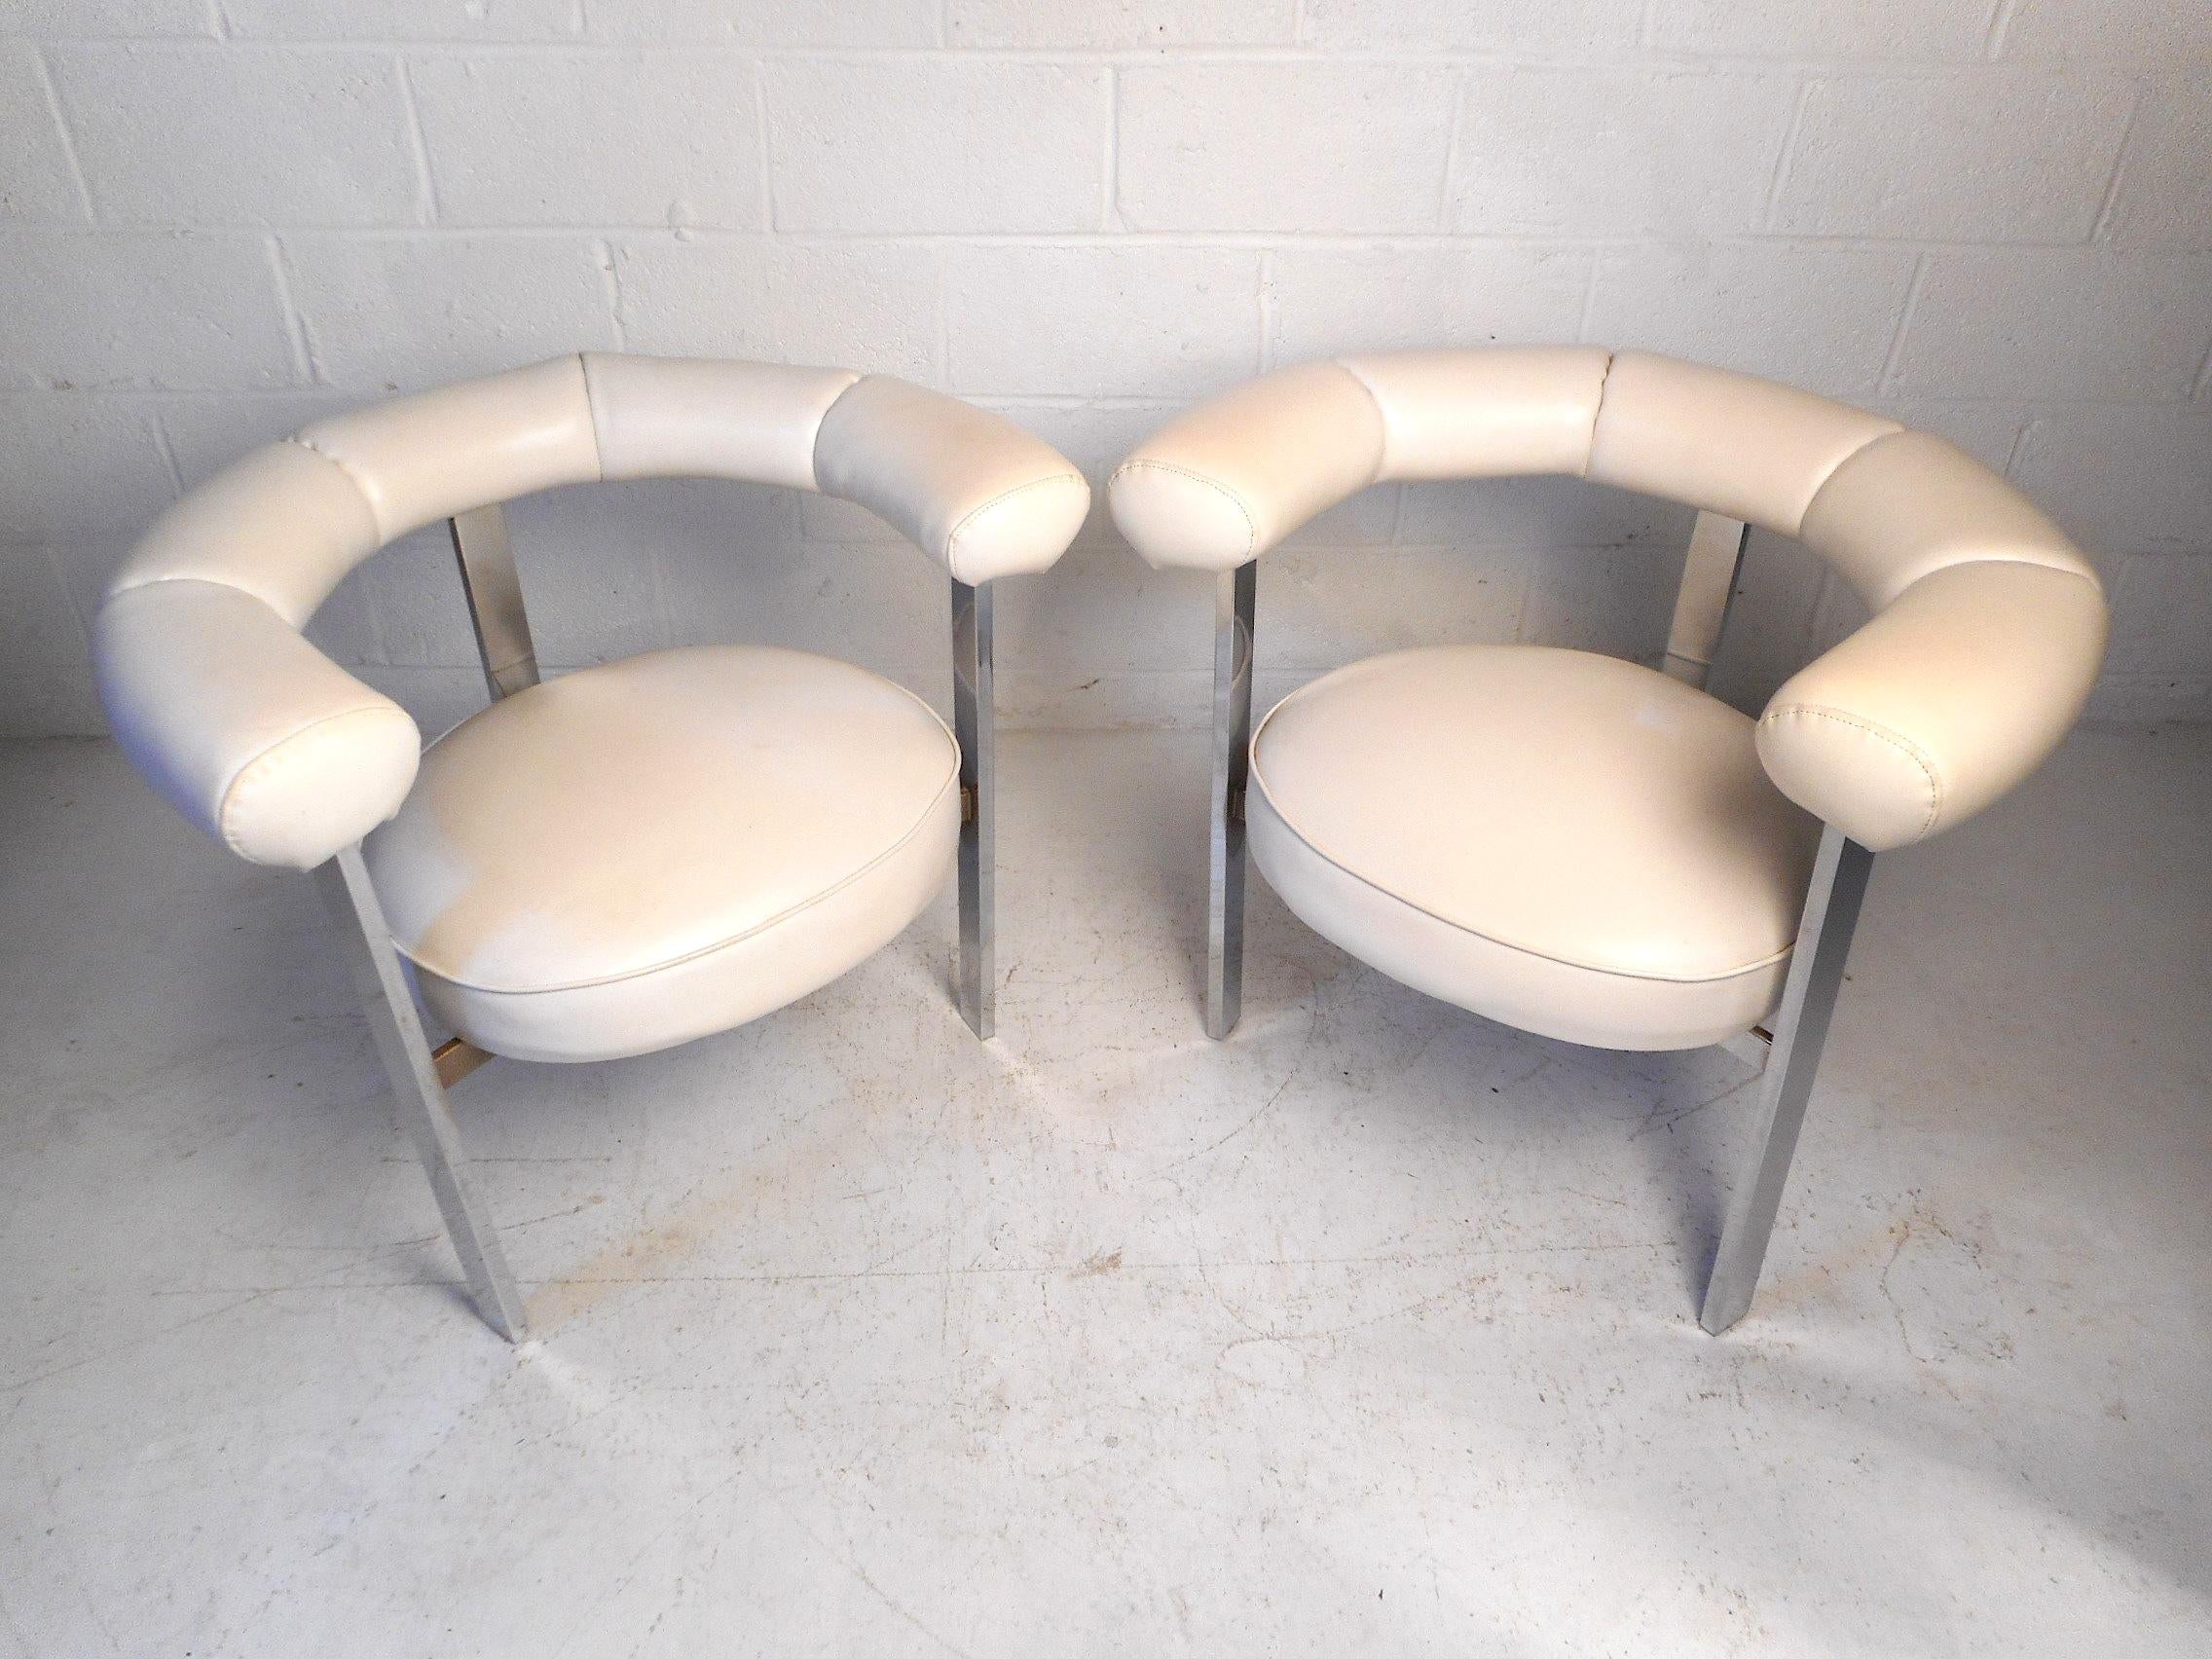 This impressive set of Mid-Century Modern barrel chairs feature a lovely white faux-leather upholstery supported by a sturdy chrome frame. These unique chairs are a perfect addition to any home, business, or office's modern interior. Please confirm